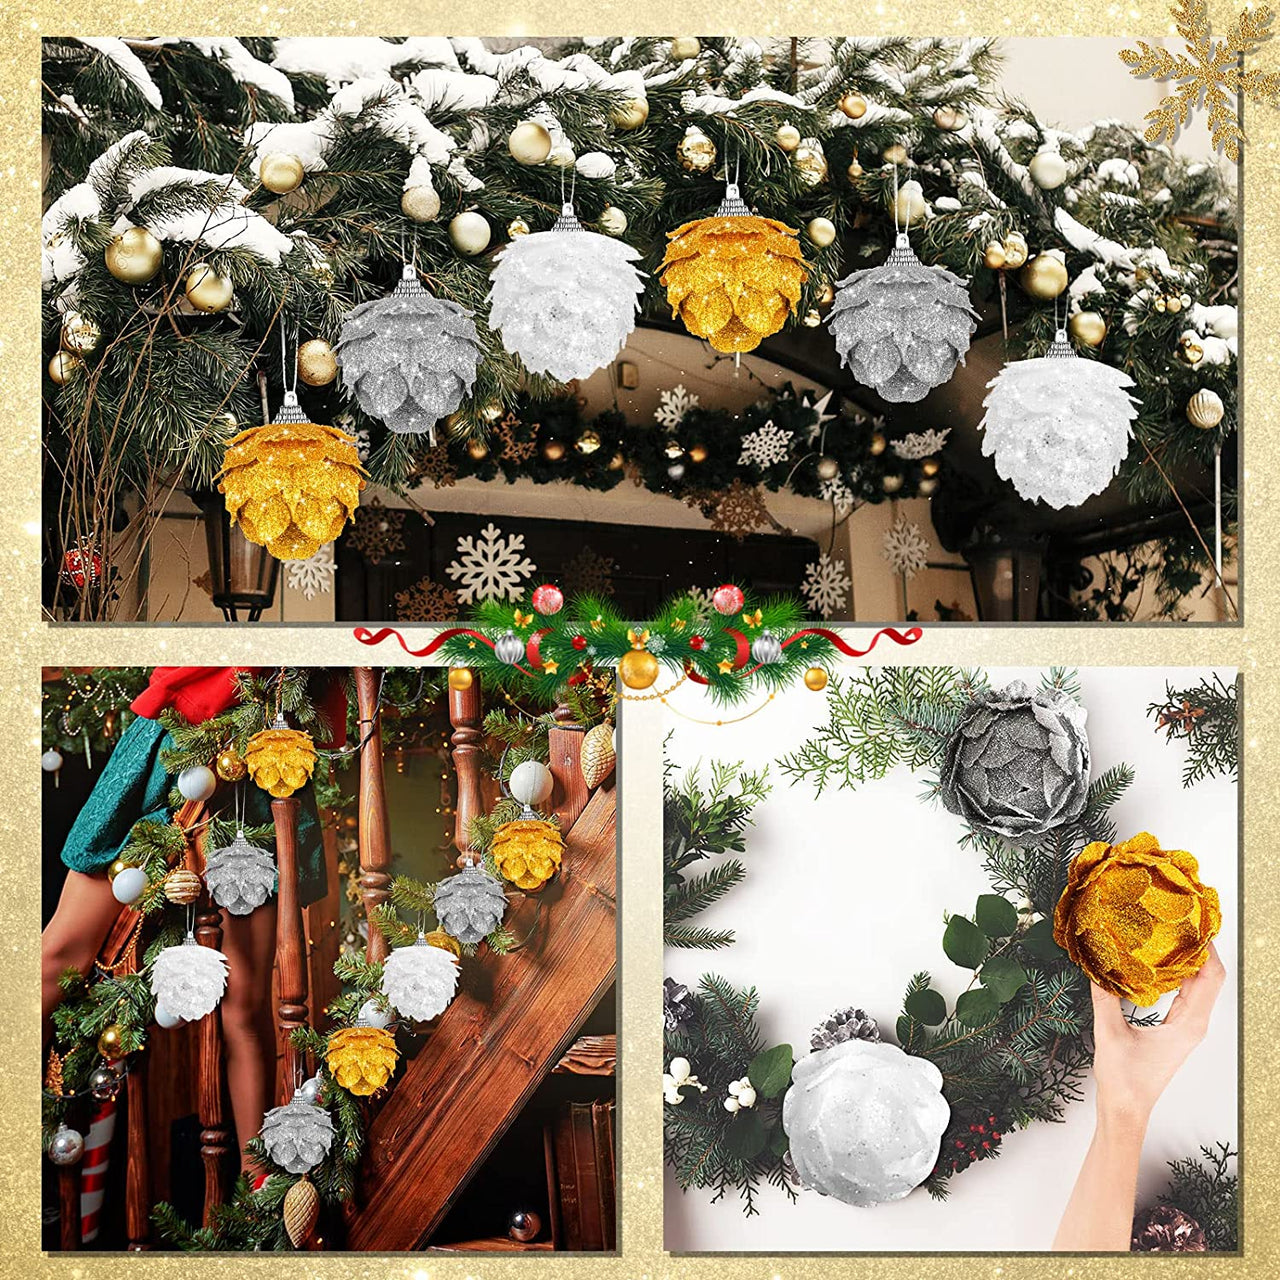 12 Pieces Artificial Flowers Christmas Ornaments Glitter Christmas Ball Ornaments White Pinecone Ornament Flower Hanging Ornaments Glitter Flowers Ornaments for Christmas Tree Wreath Decoration